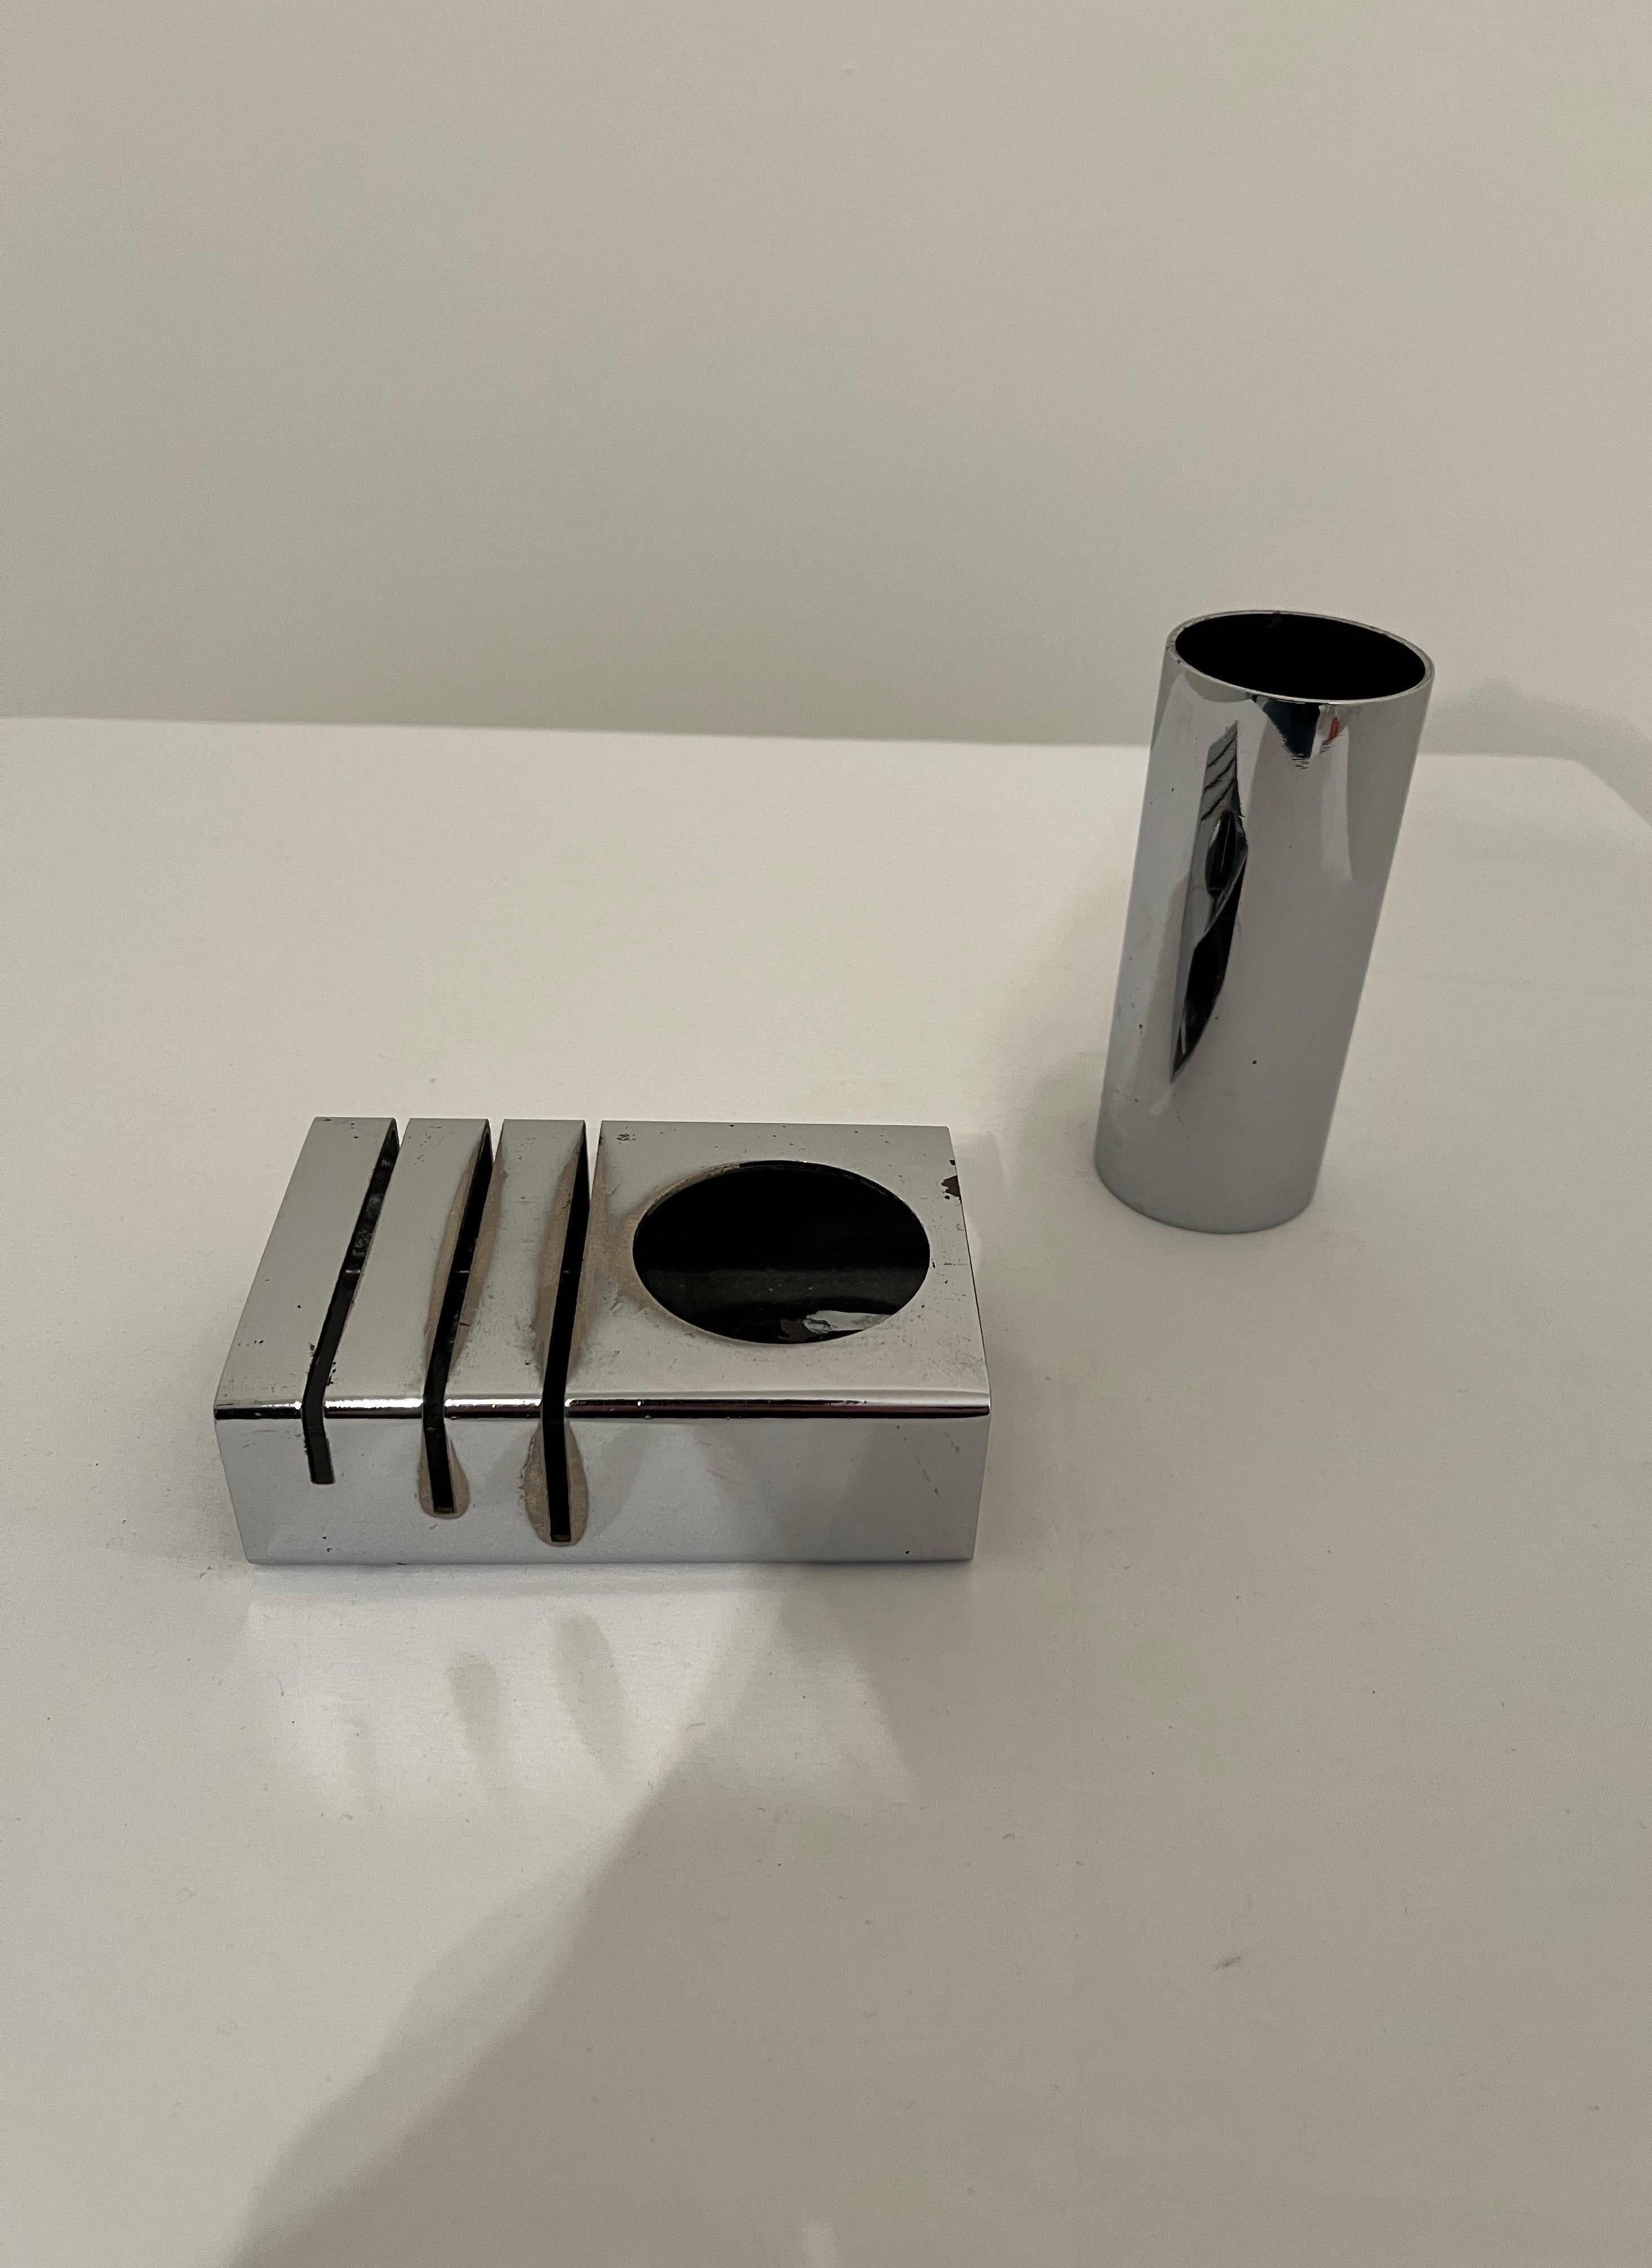 Chrome Modernist Space Age Desk Tidy / Holder - Italy c1960s For Sale 1